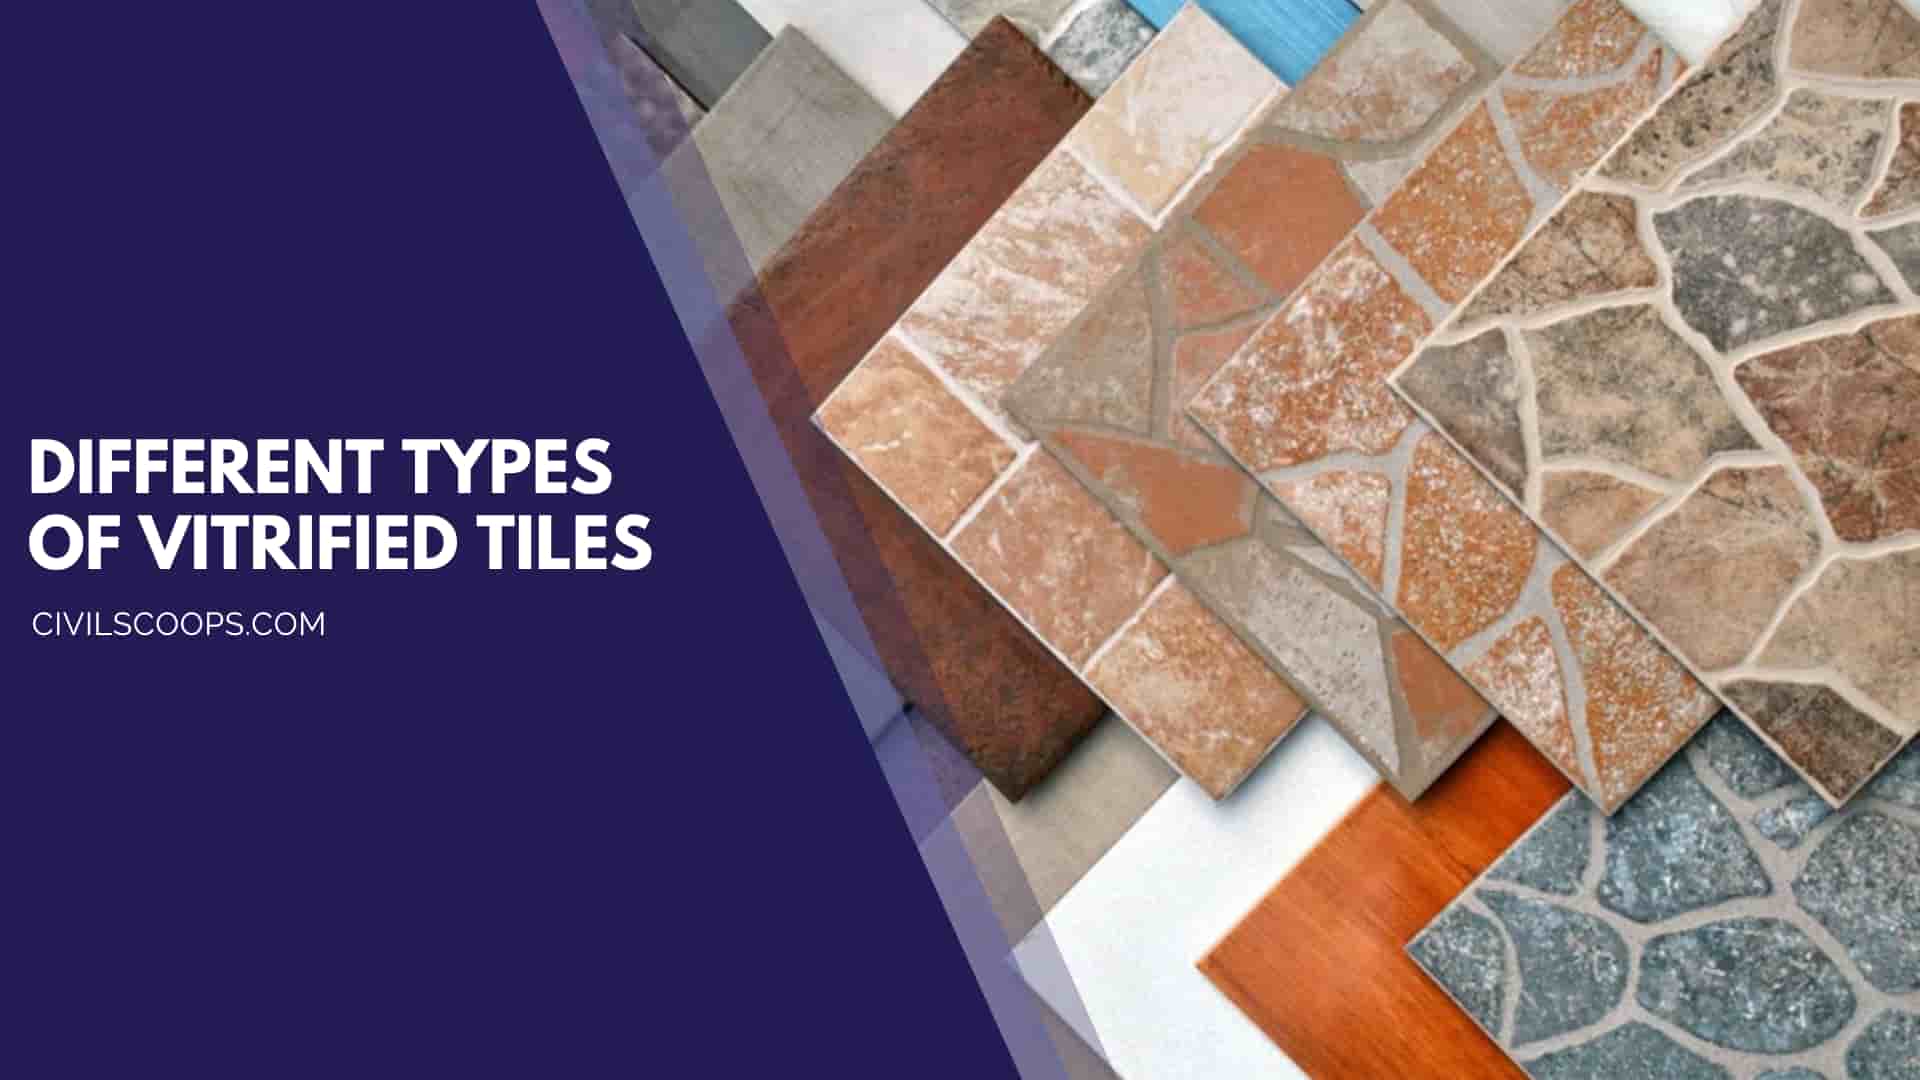 Different Types of Vitrified Tiles